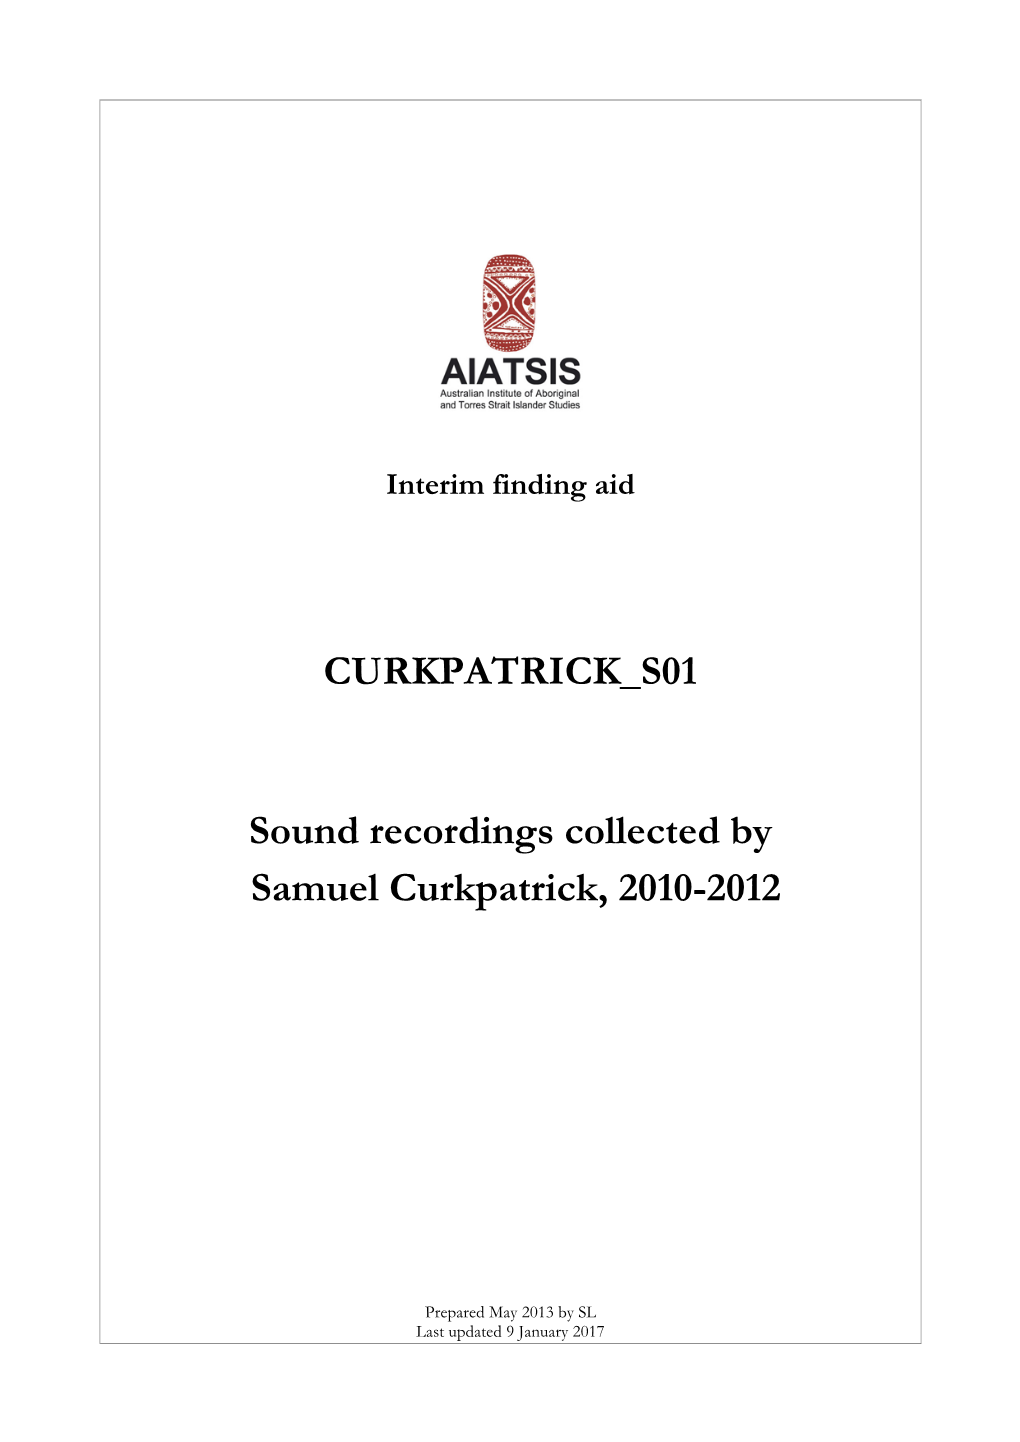 CURKPATRICK S01 Sound Recordings Collected by Samuel